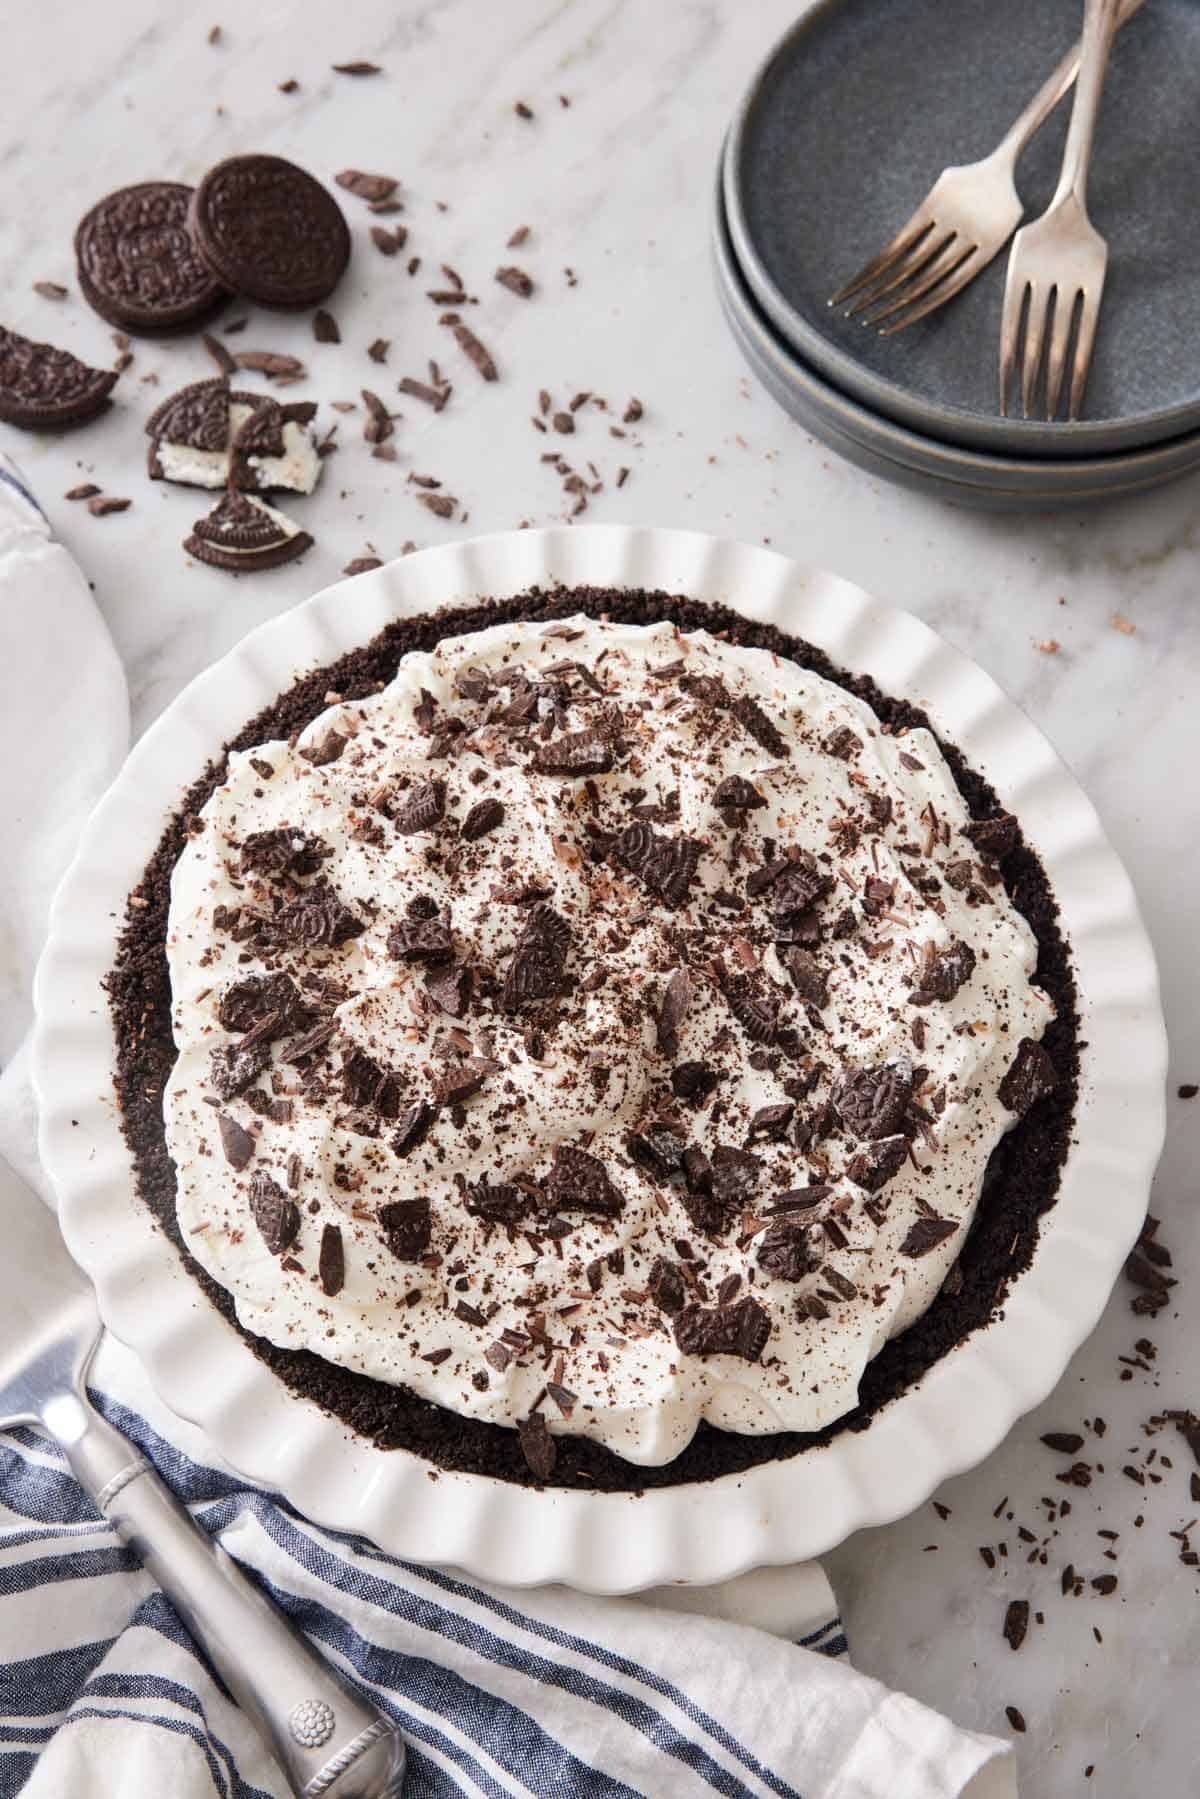 Overhead view of a mud pie in a white baking dish. Oreos, stacks of plates, and forks in the background.